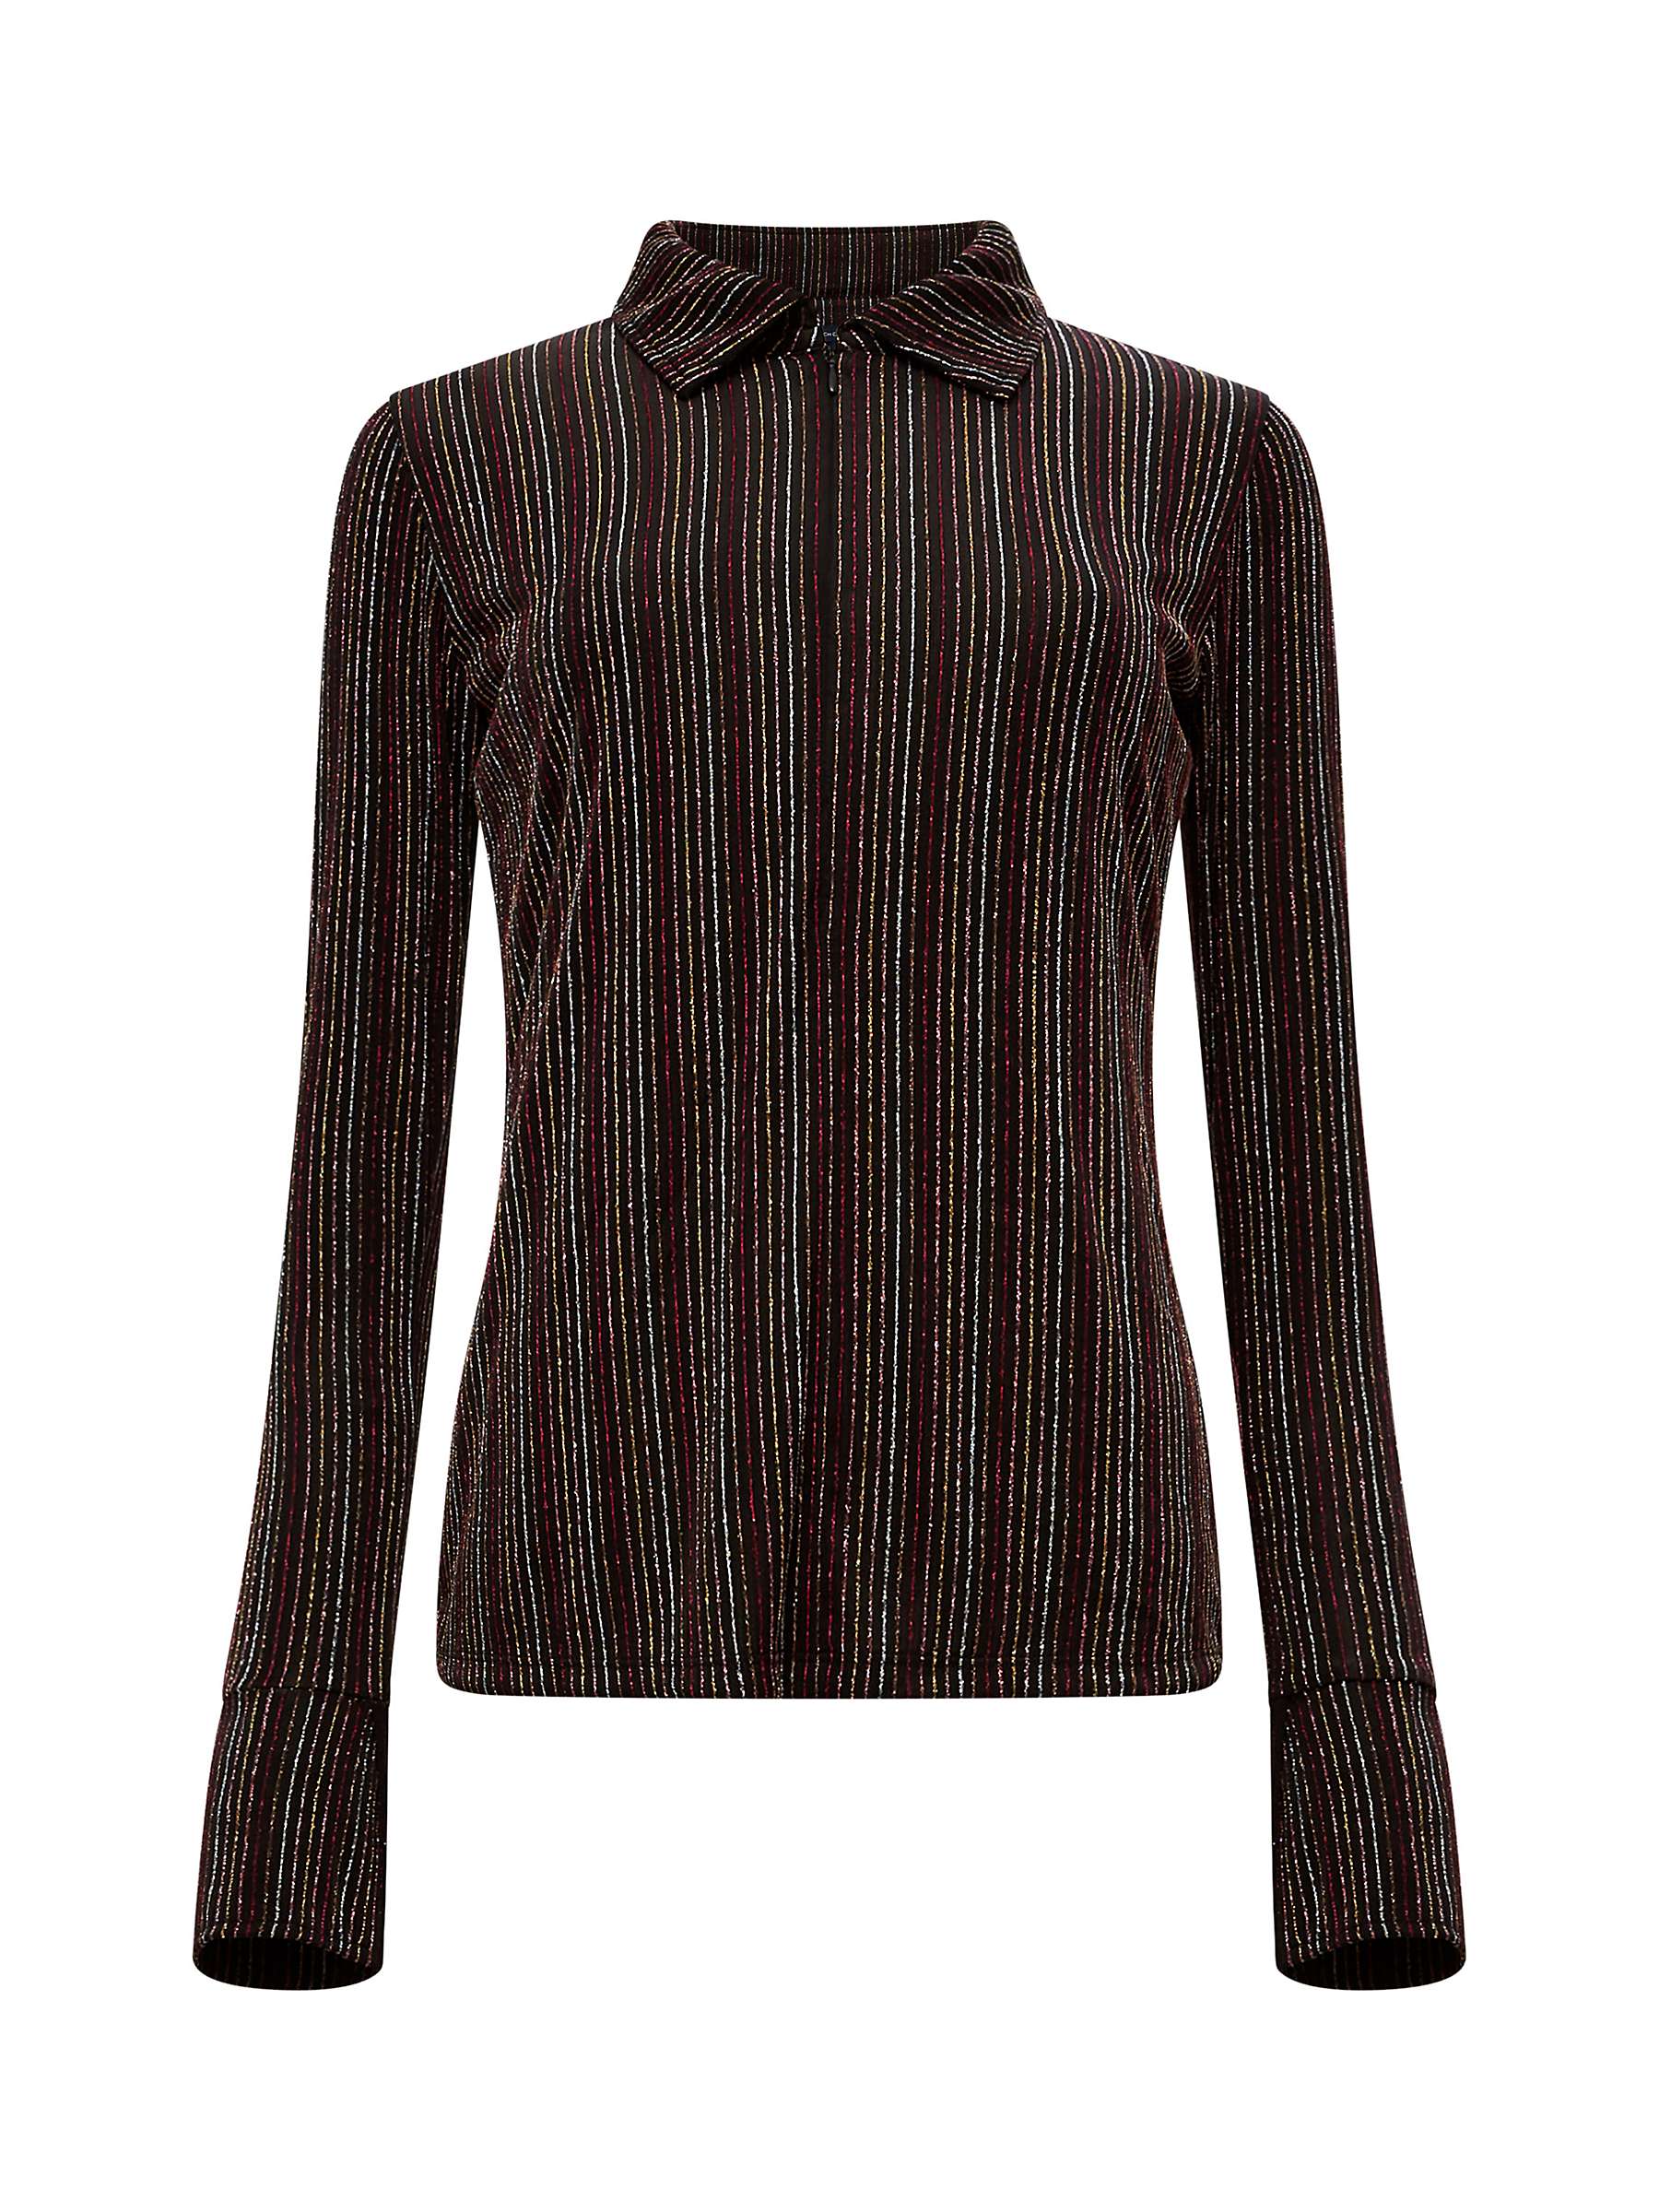 Buy French Connection Paula Shirt, Blackout/Multi Online at johnlewis.com